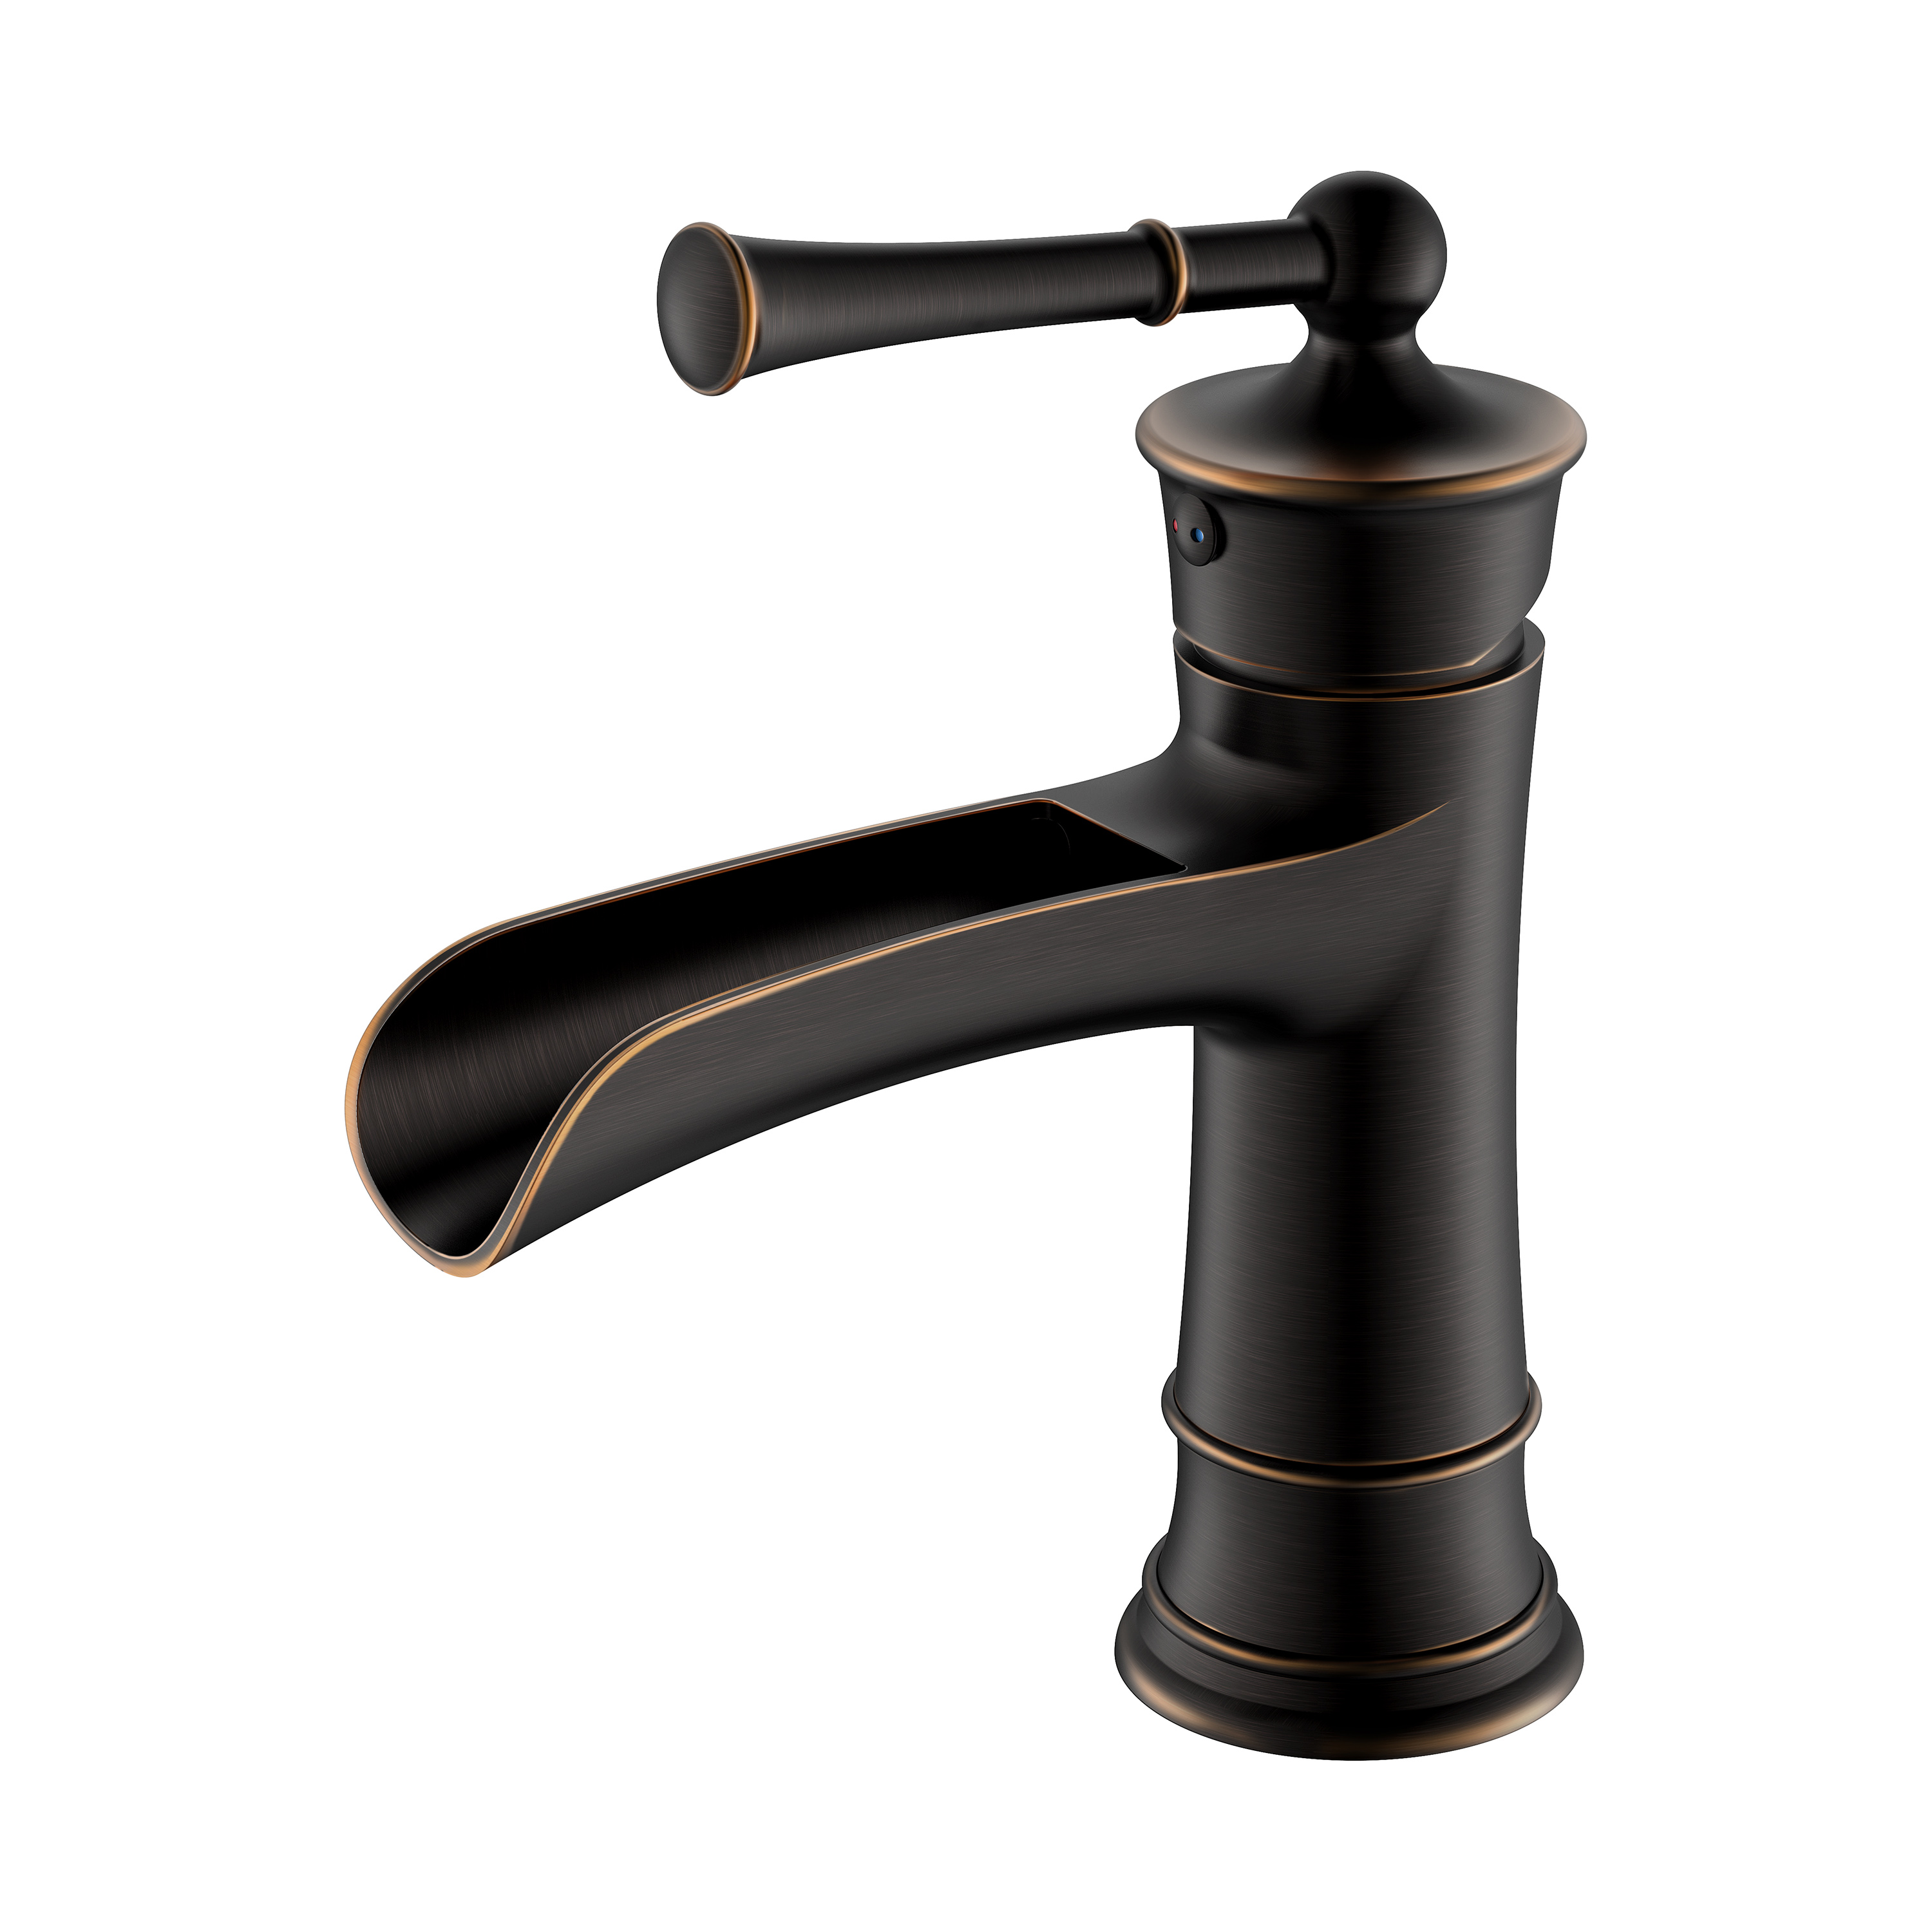 How to Select a Waterfall Bathroom Faucet?